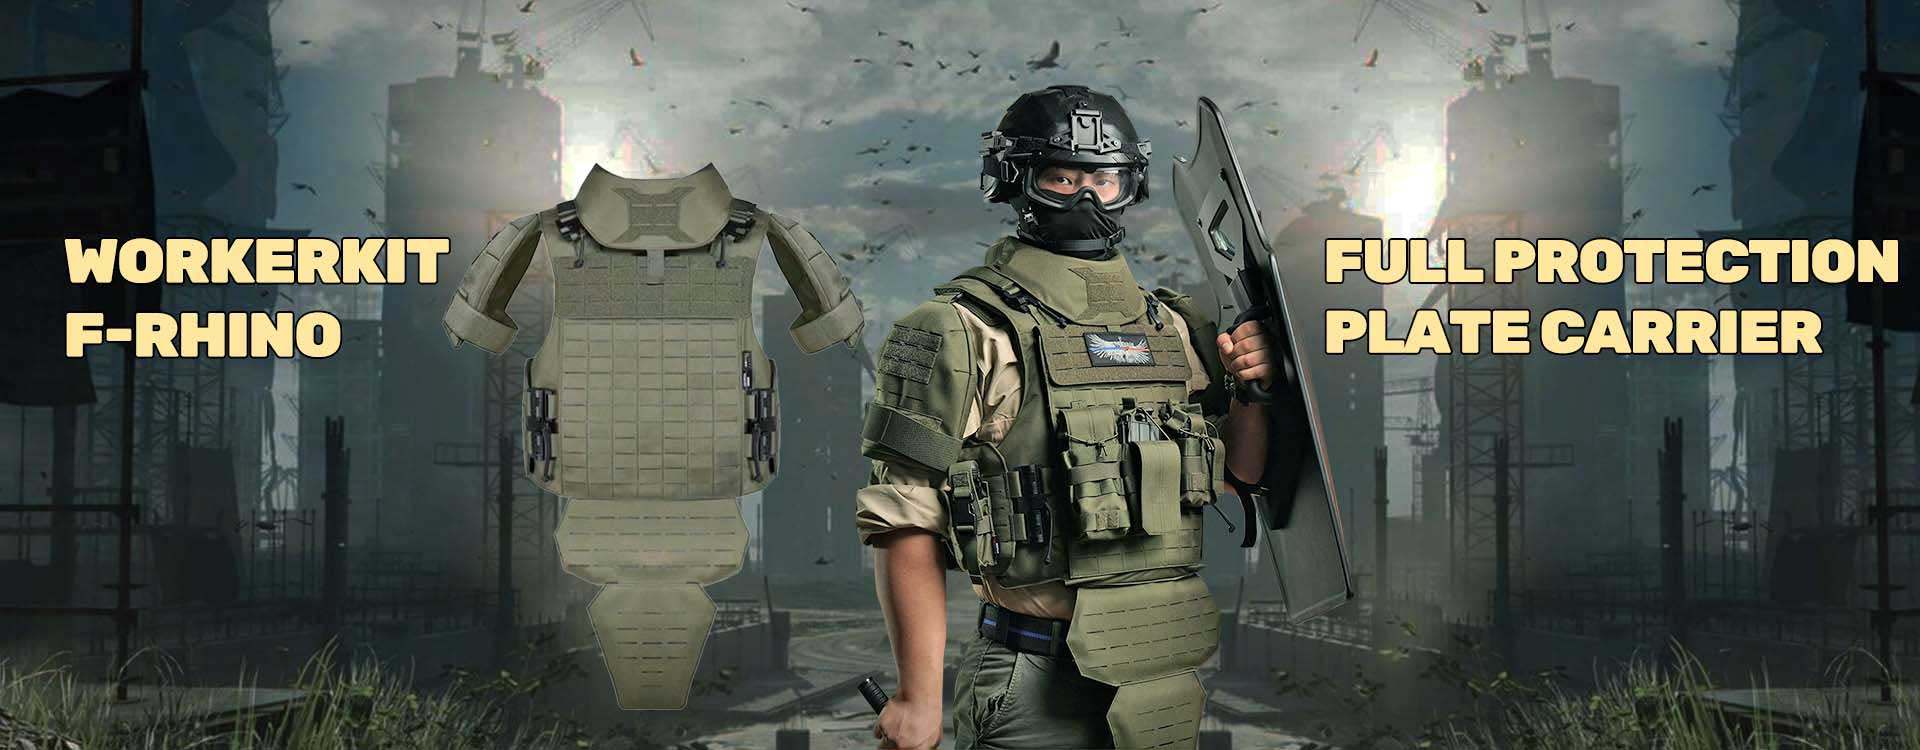 tactical full protection plate carrier